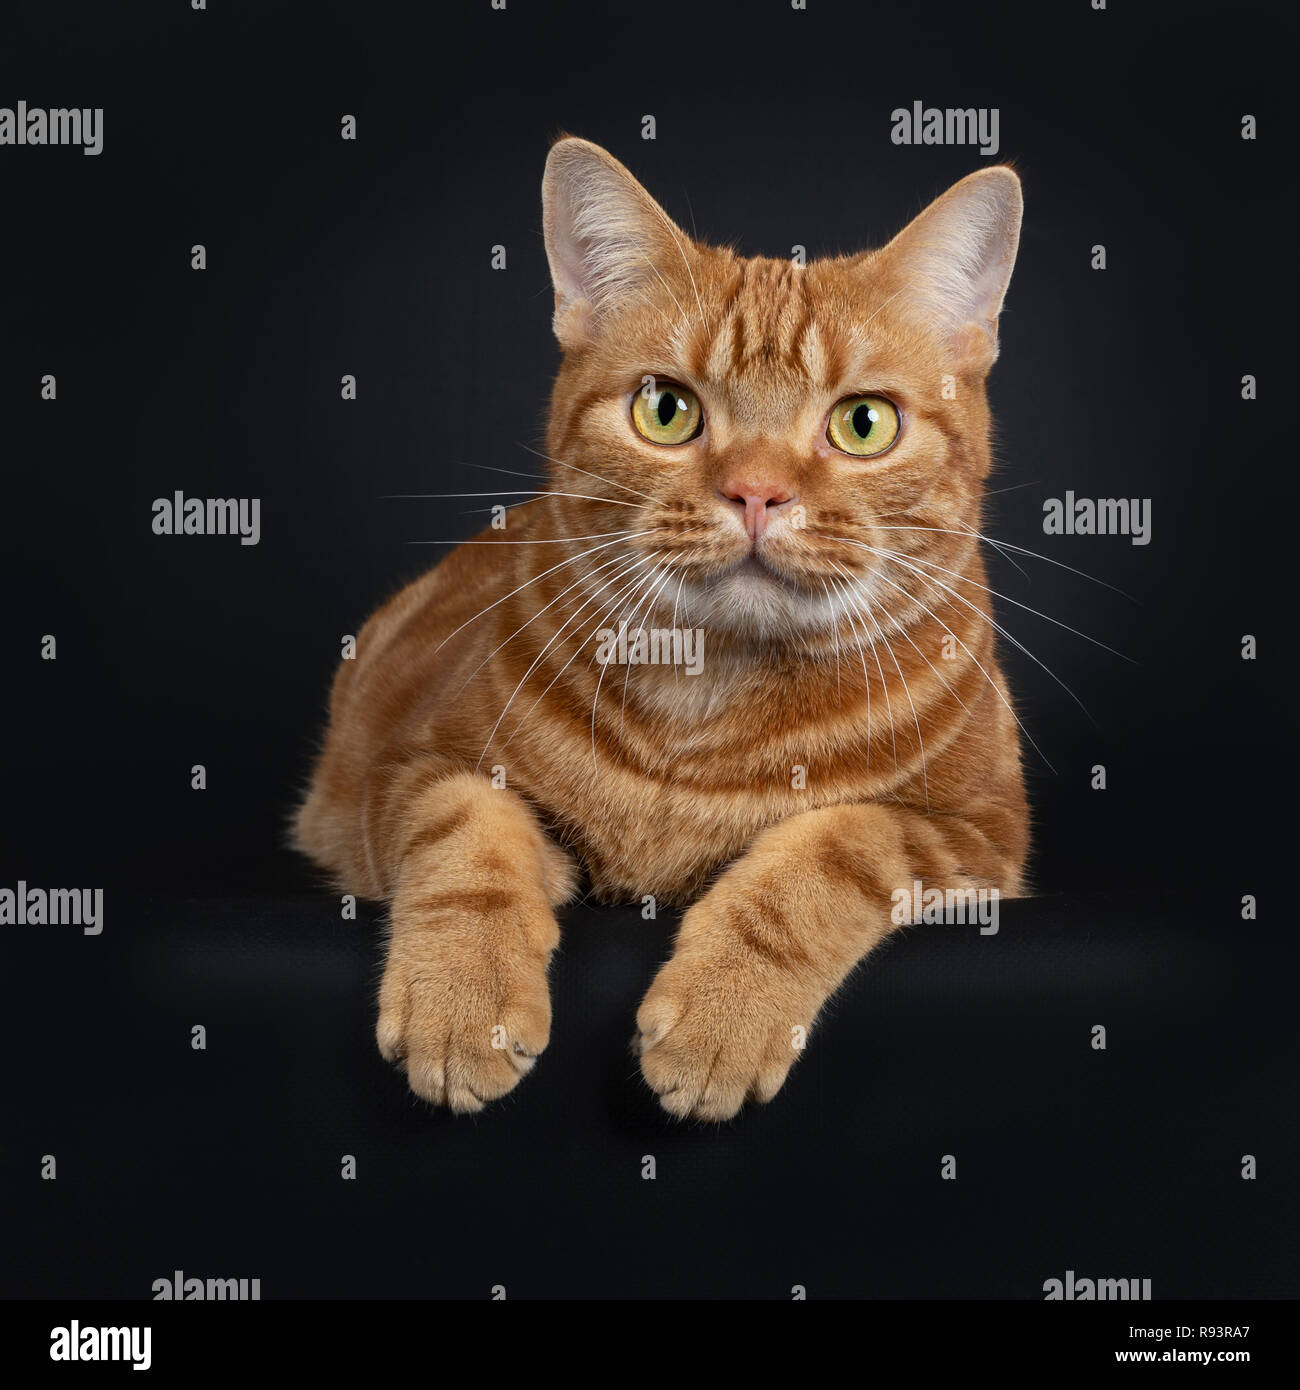 Adorable young adult red tabby American Shorthair cat, laying down with front paws hanging over edge. Looking at lens with yellow / green eyes. Isolat Stock Photo